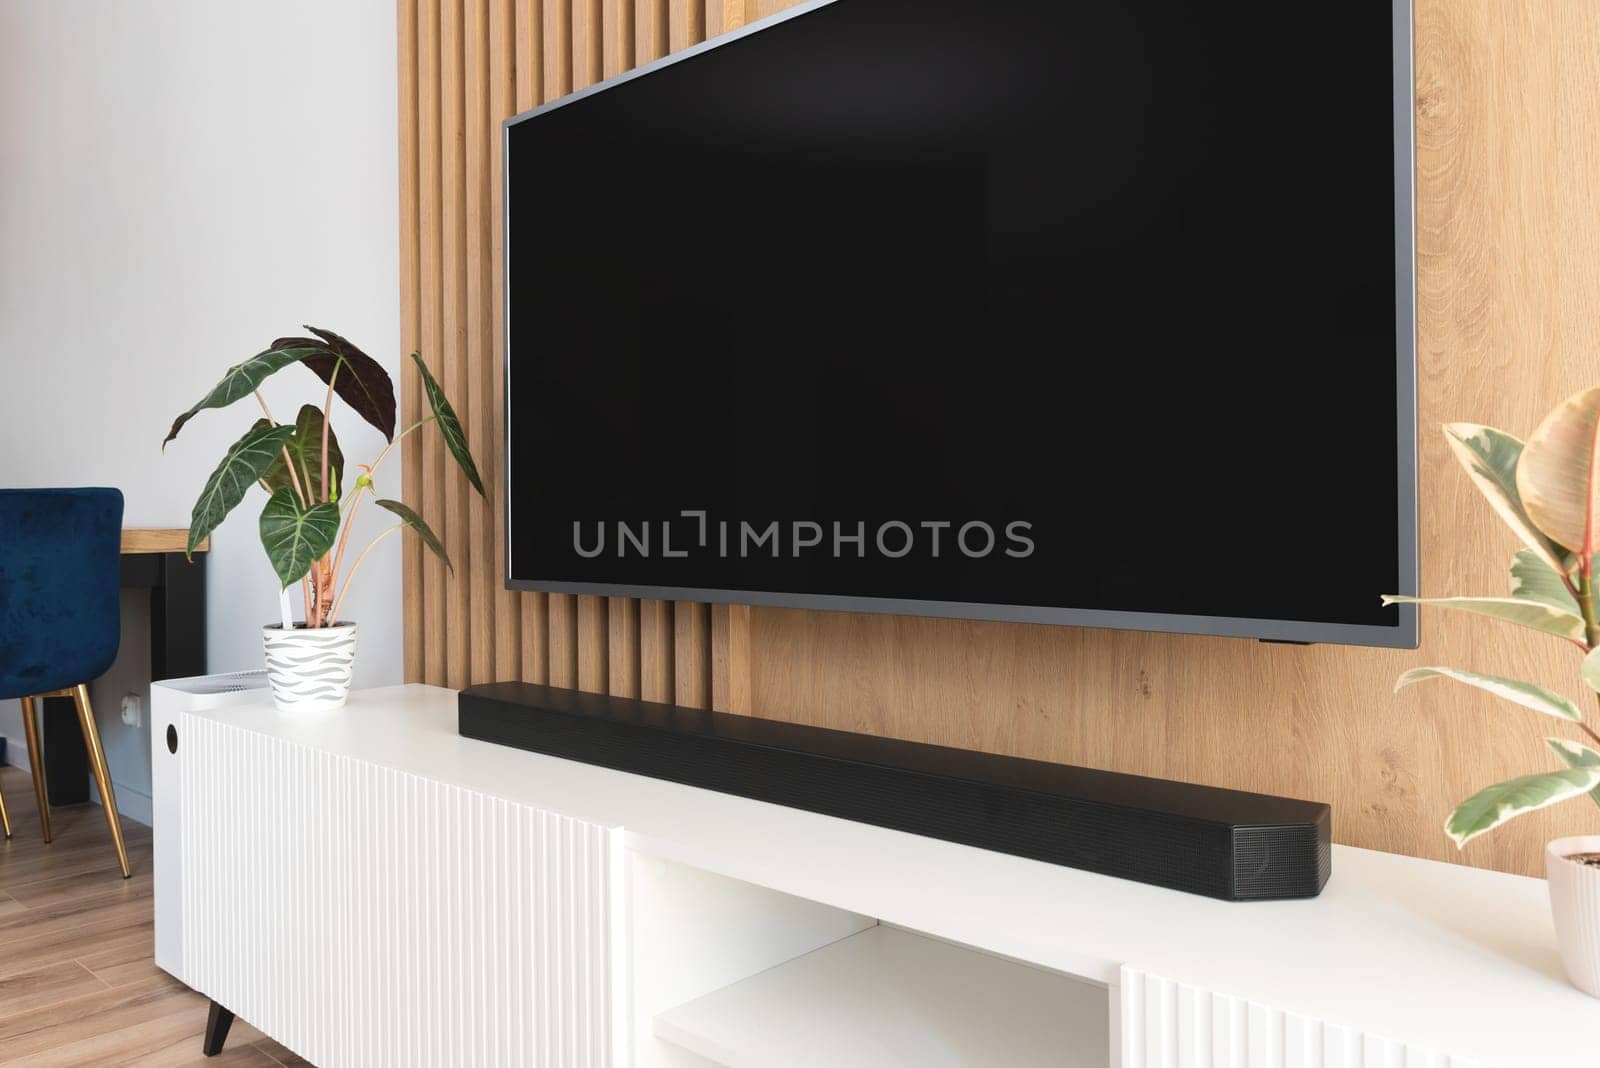 Soundbar in a modern home. Listening to music in living room